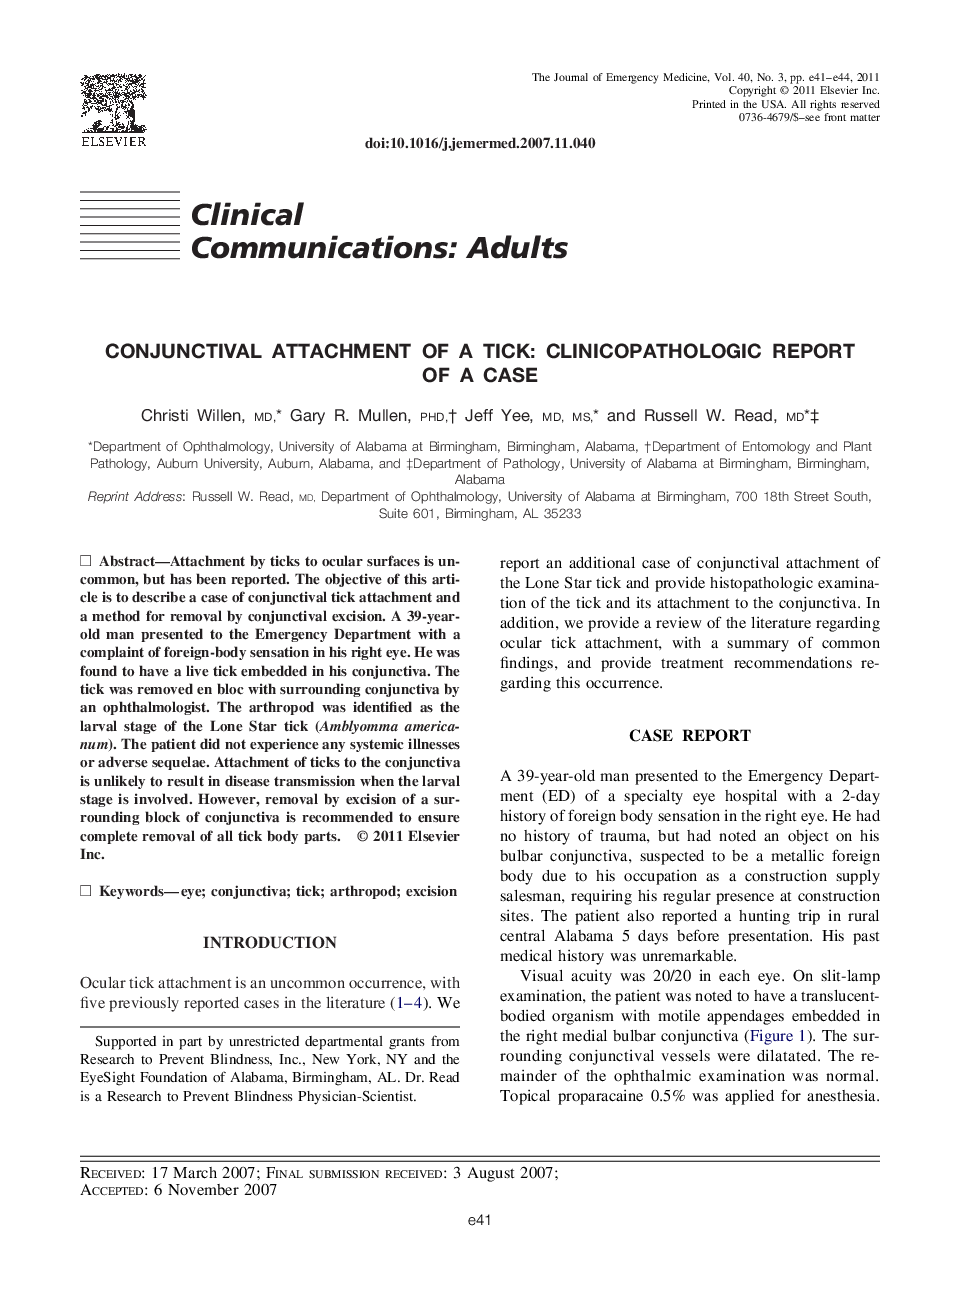 Conjunctival Attachment of a Tick: Clinicopathologic Report of a Case 